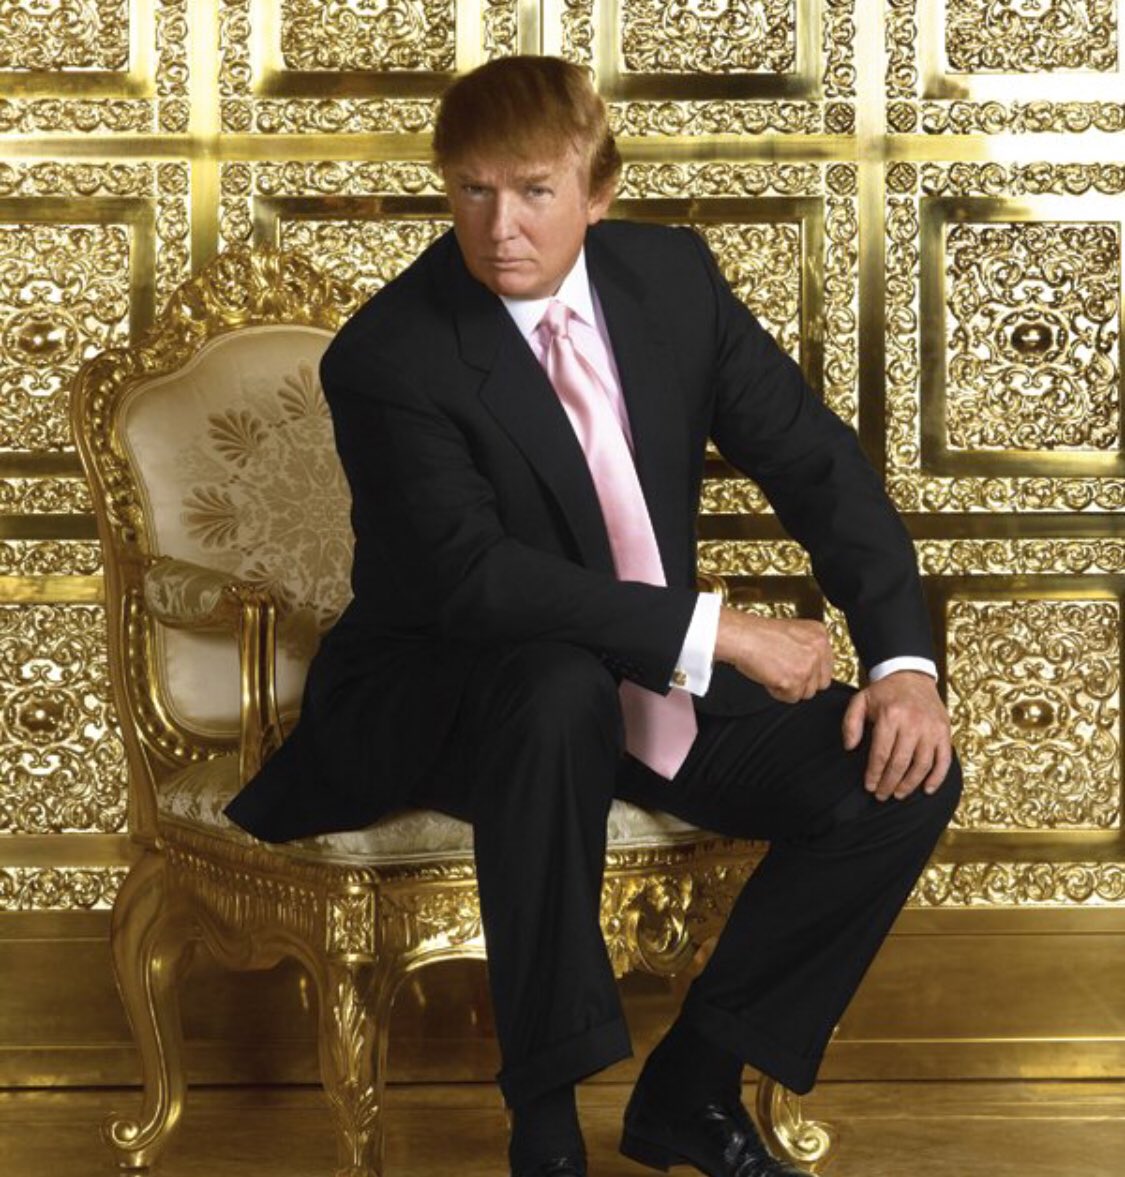 Today, @realDonaldTrump described #Canada as “very spoiled.” On behalf of all my fellow Canadians, I am sharing a photo of him in his gold plated NY apartment. #NAFTA #uspoli